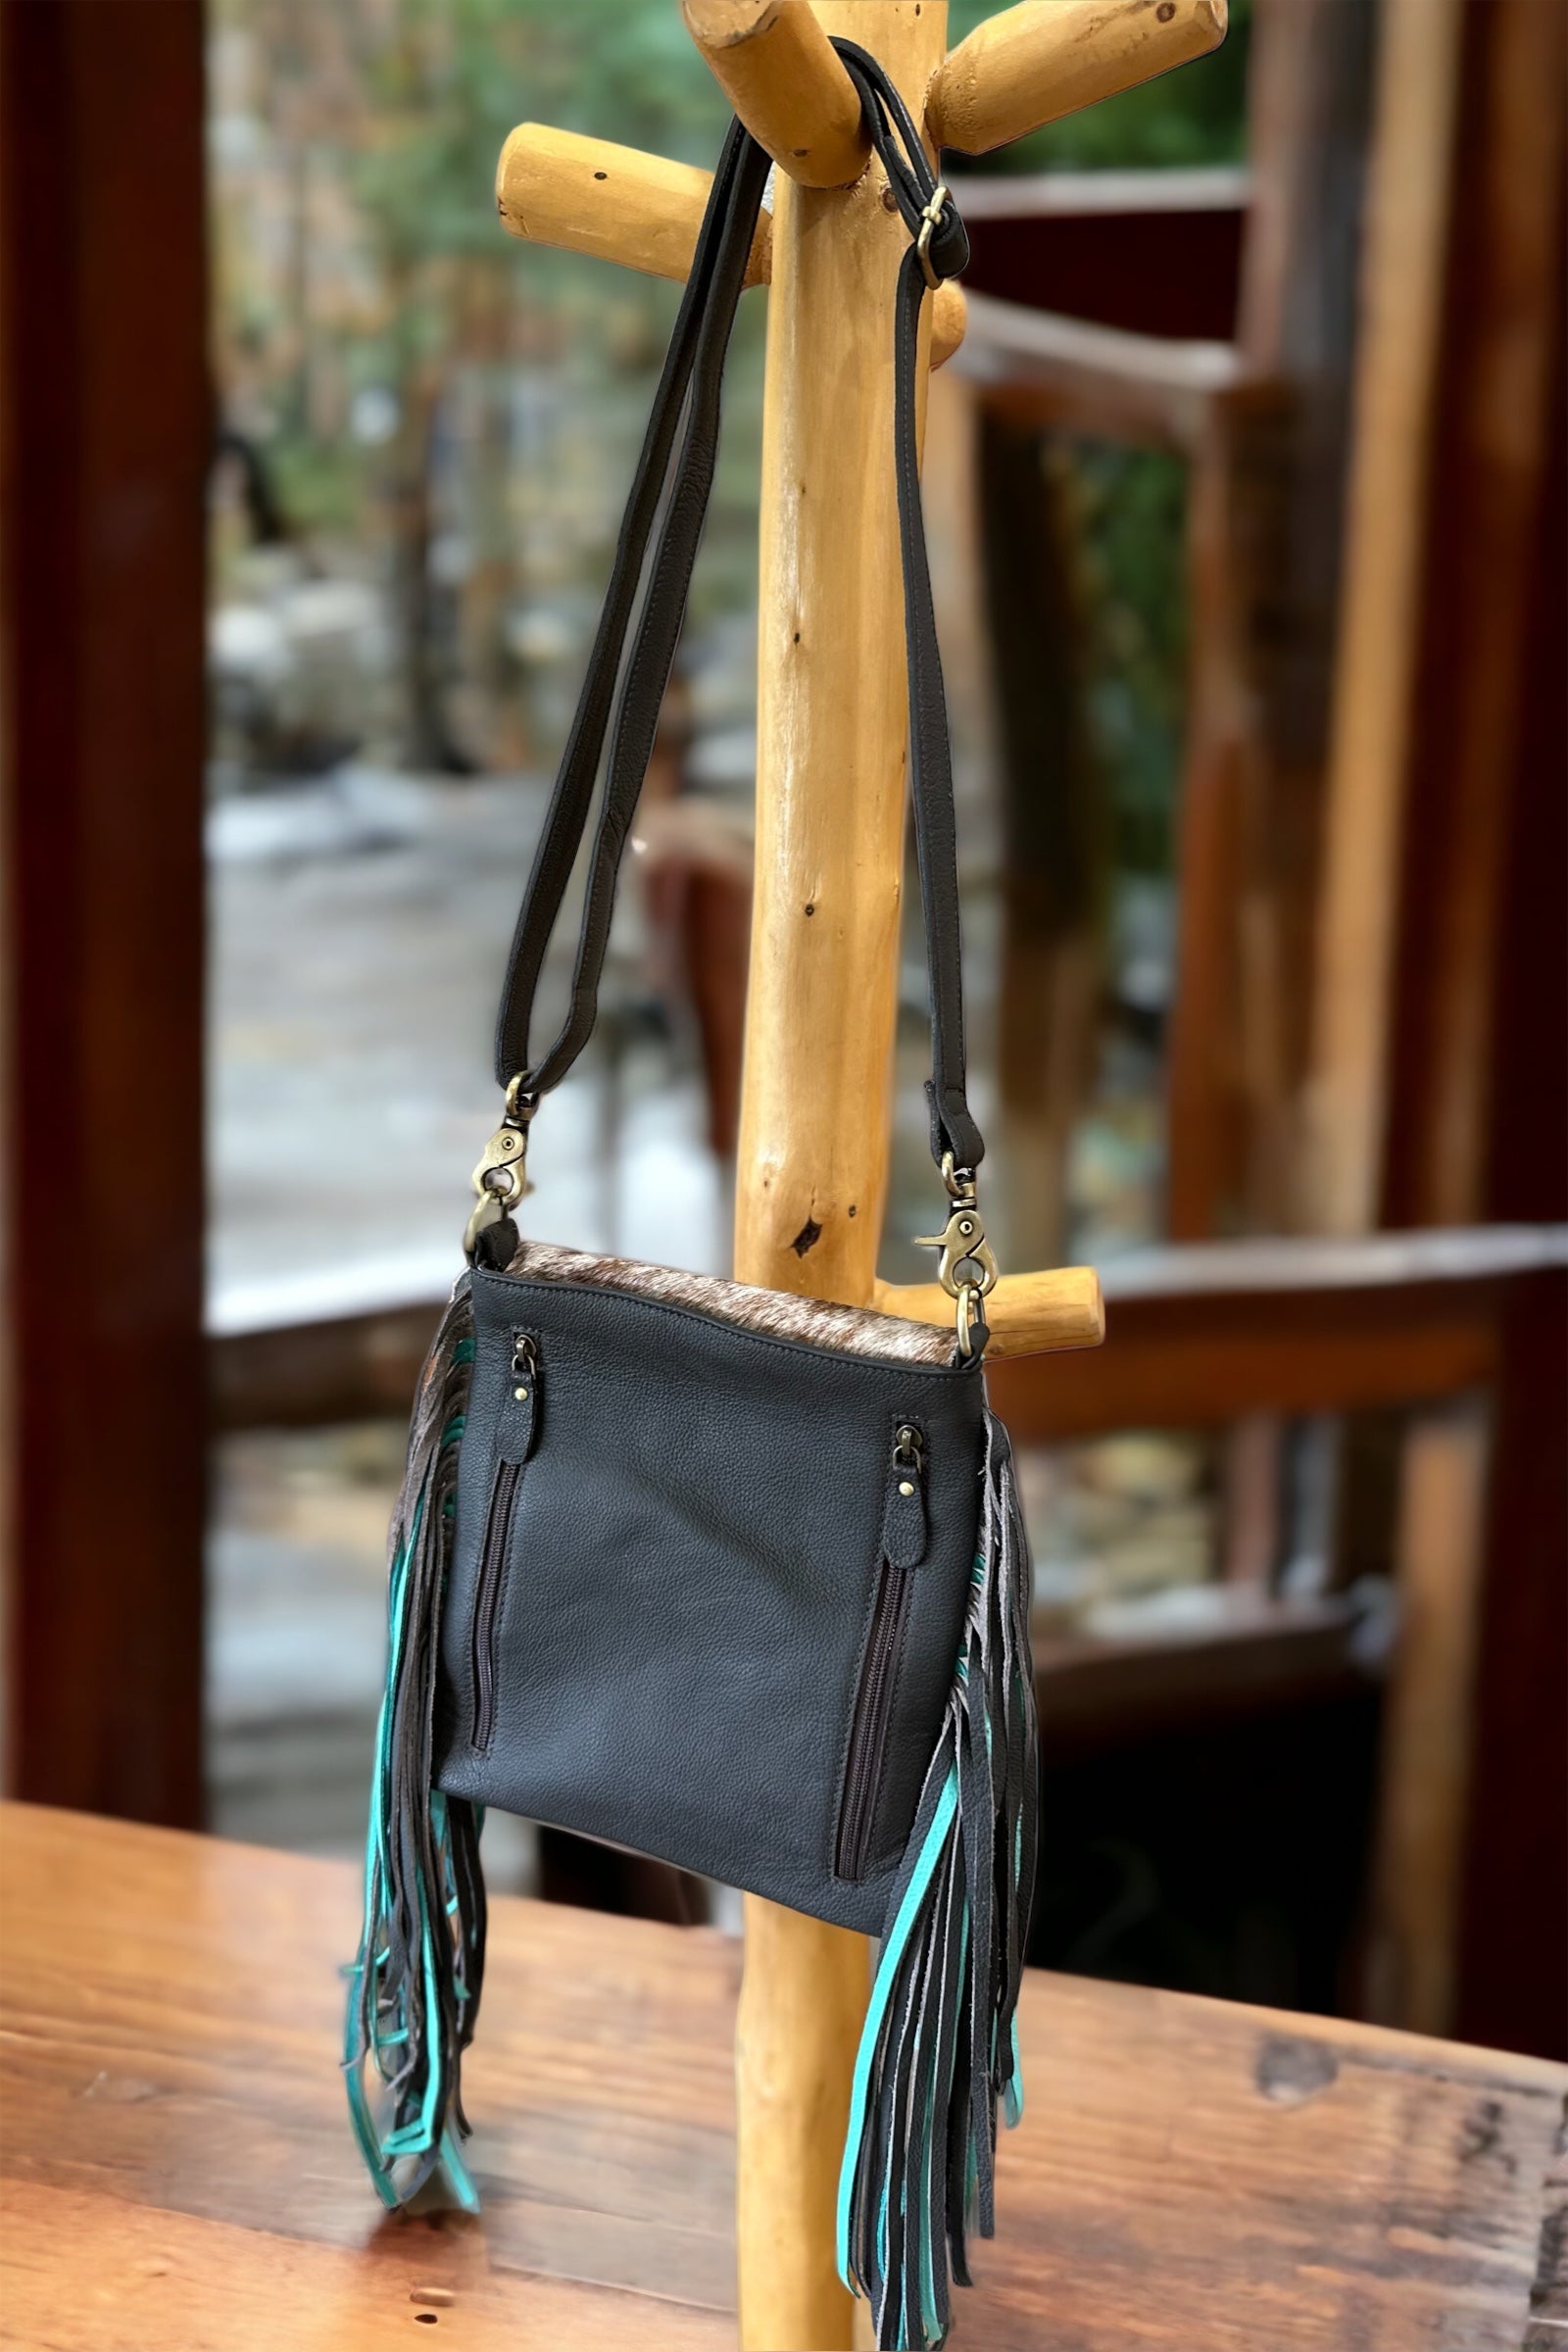 Fringe cross body western purse- with cowhide and real turquoise